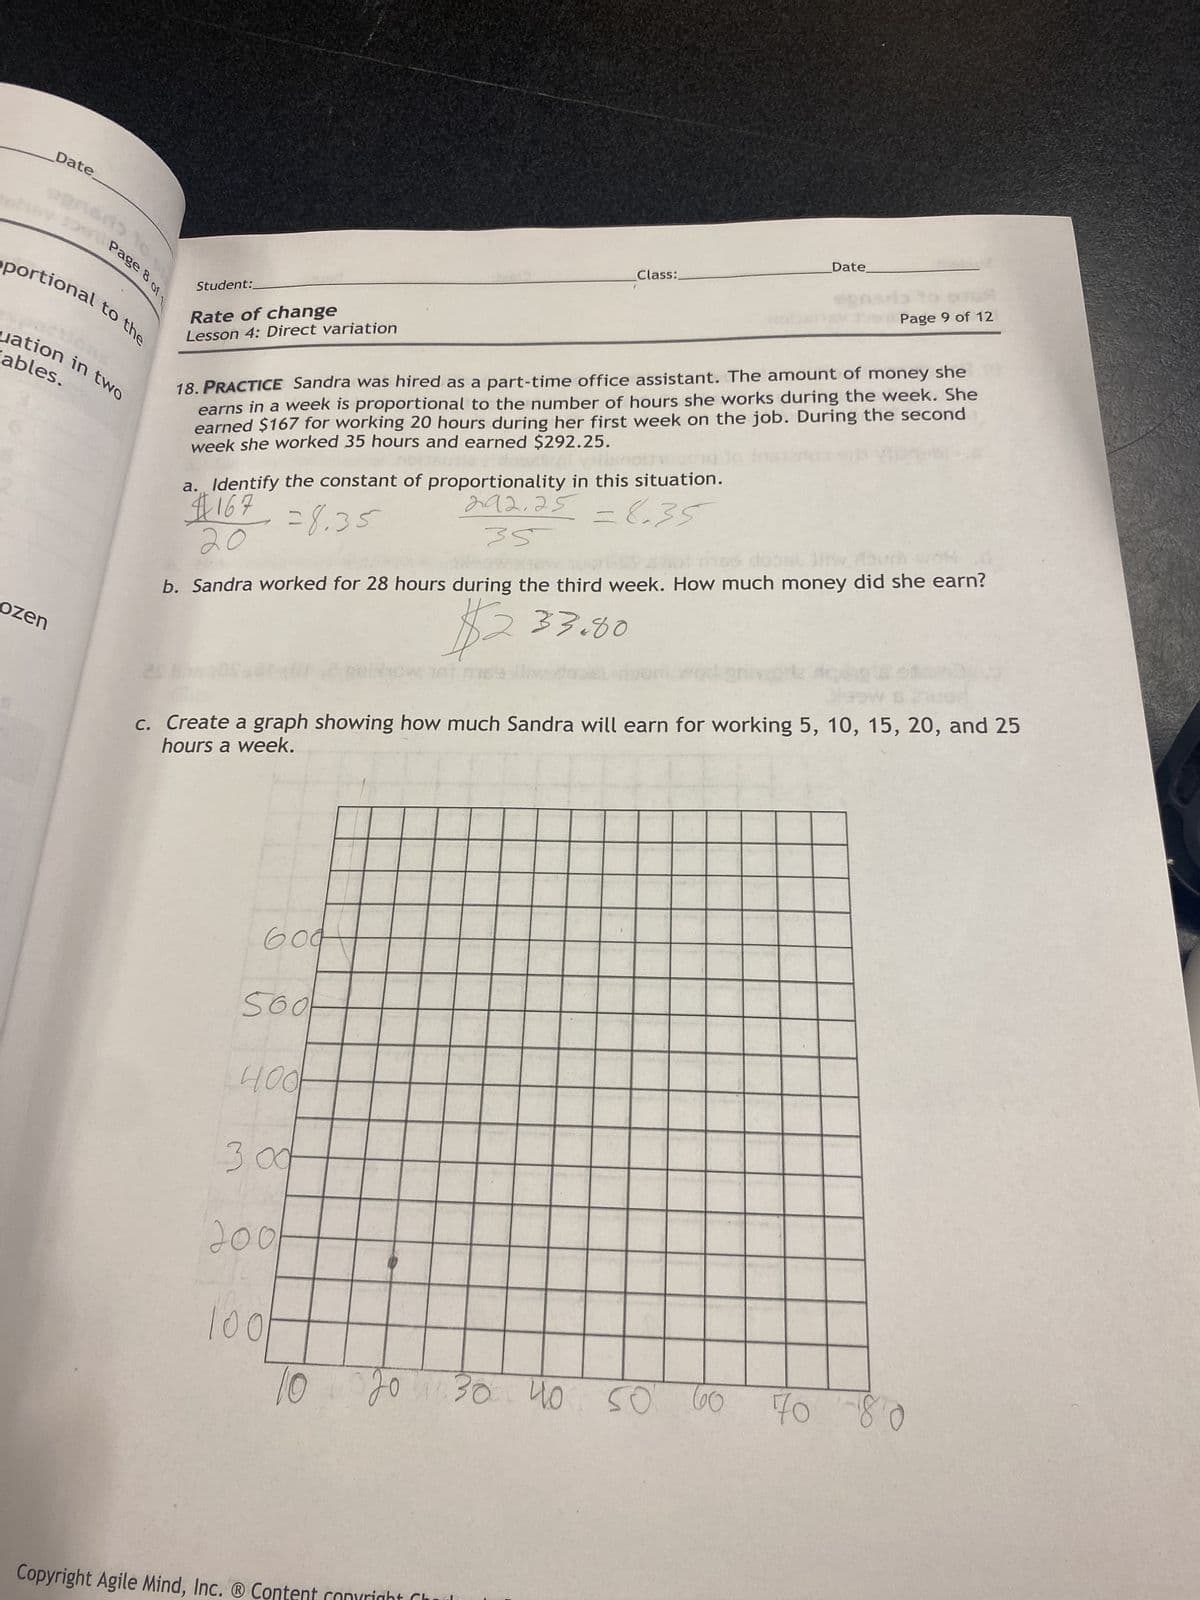 Date
Page 8 of 1
oportional to the
ozen
uation in two
ables.
Student:
Rate of change
Lesson 4: Direct variation
a. Identify the constant of proportionality in this situation.
#167
=8.35
292.25=8.35
18. PRACTICE Sandra was hired as a part-time office assistant. The amount of money she
earns in a week is proportional to the number of hours she works during the week. She
earned $167 for working 20 hours during her first week on the job. During the second
week she worked 35 hours and earned $292.25.
604
35
b. Sandra worked for 28 hours during the third week. How much money did she earn?
$233.00
Sool
400
Class:
3.00
701
c. Create a graph showing how much Sandra will earn for working 5, 10, 15, 20, and 25
hours a week.
200
100
10
Date
20 30 40 50 60
Copyright Agile Mind, Inc. ® Content copyright Ch
Page 9 of 12
gta
70 80